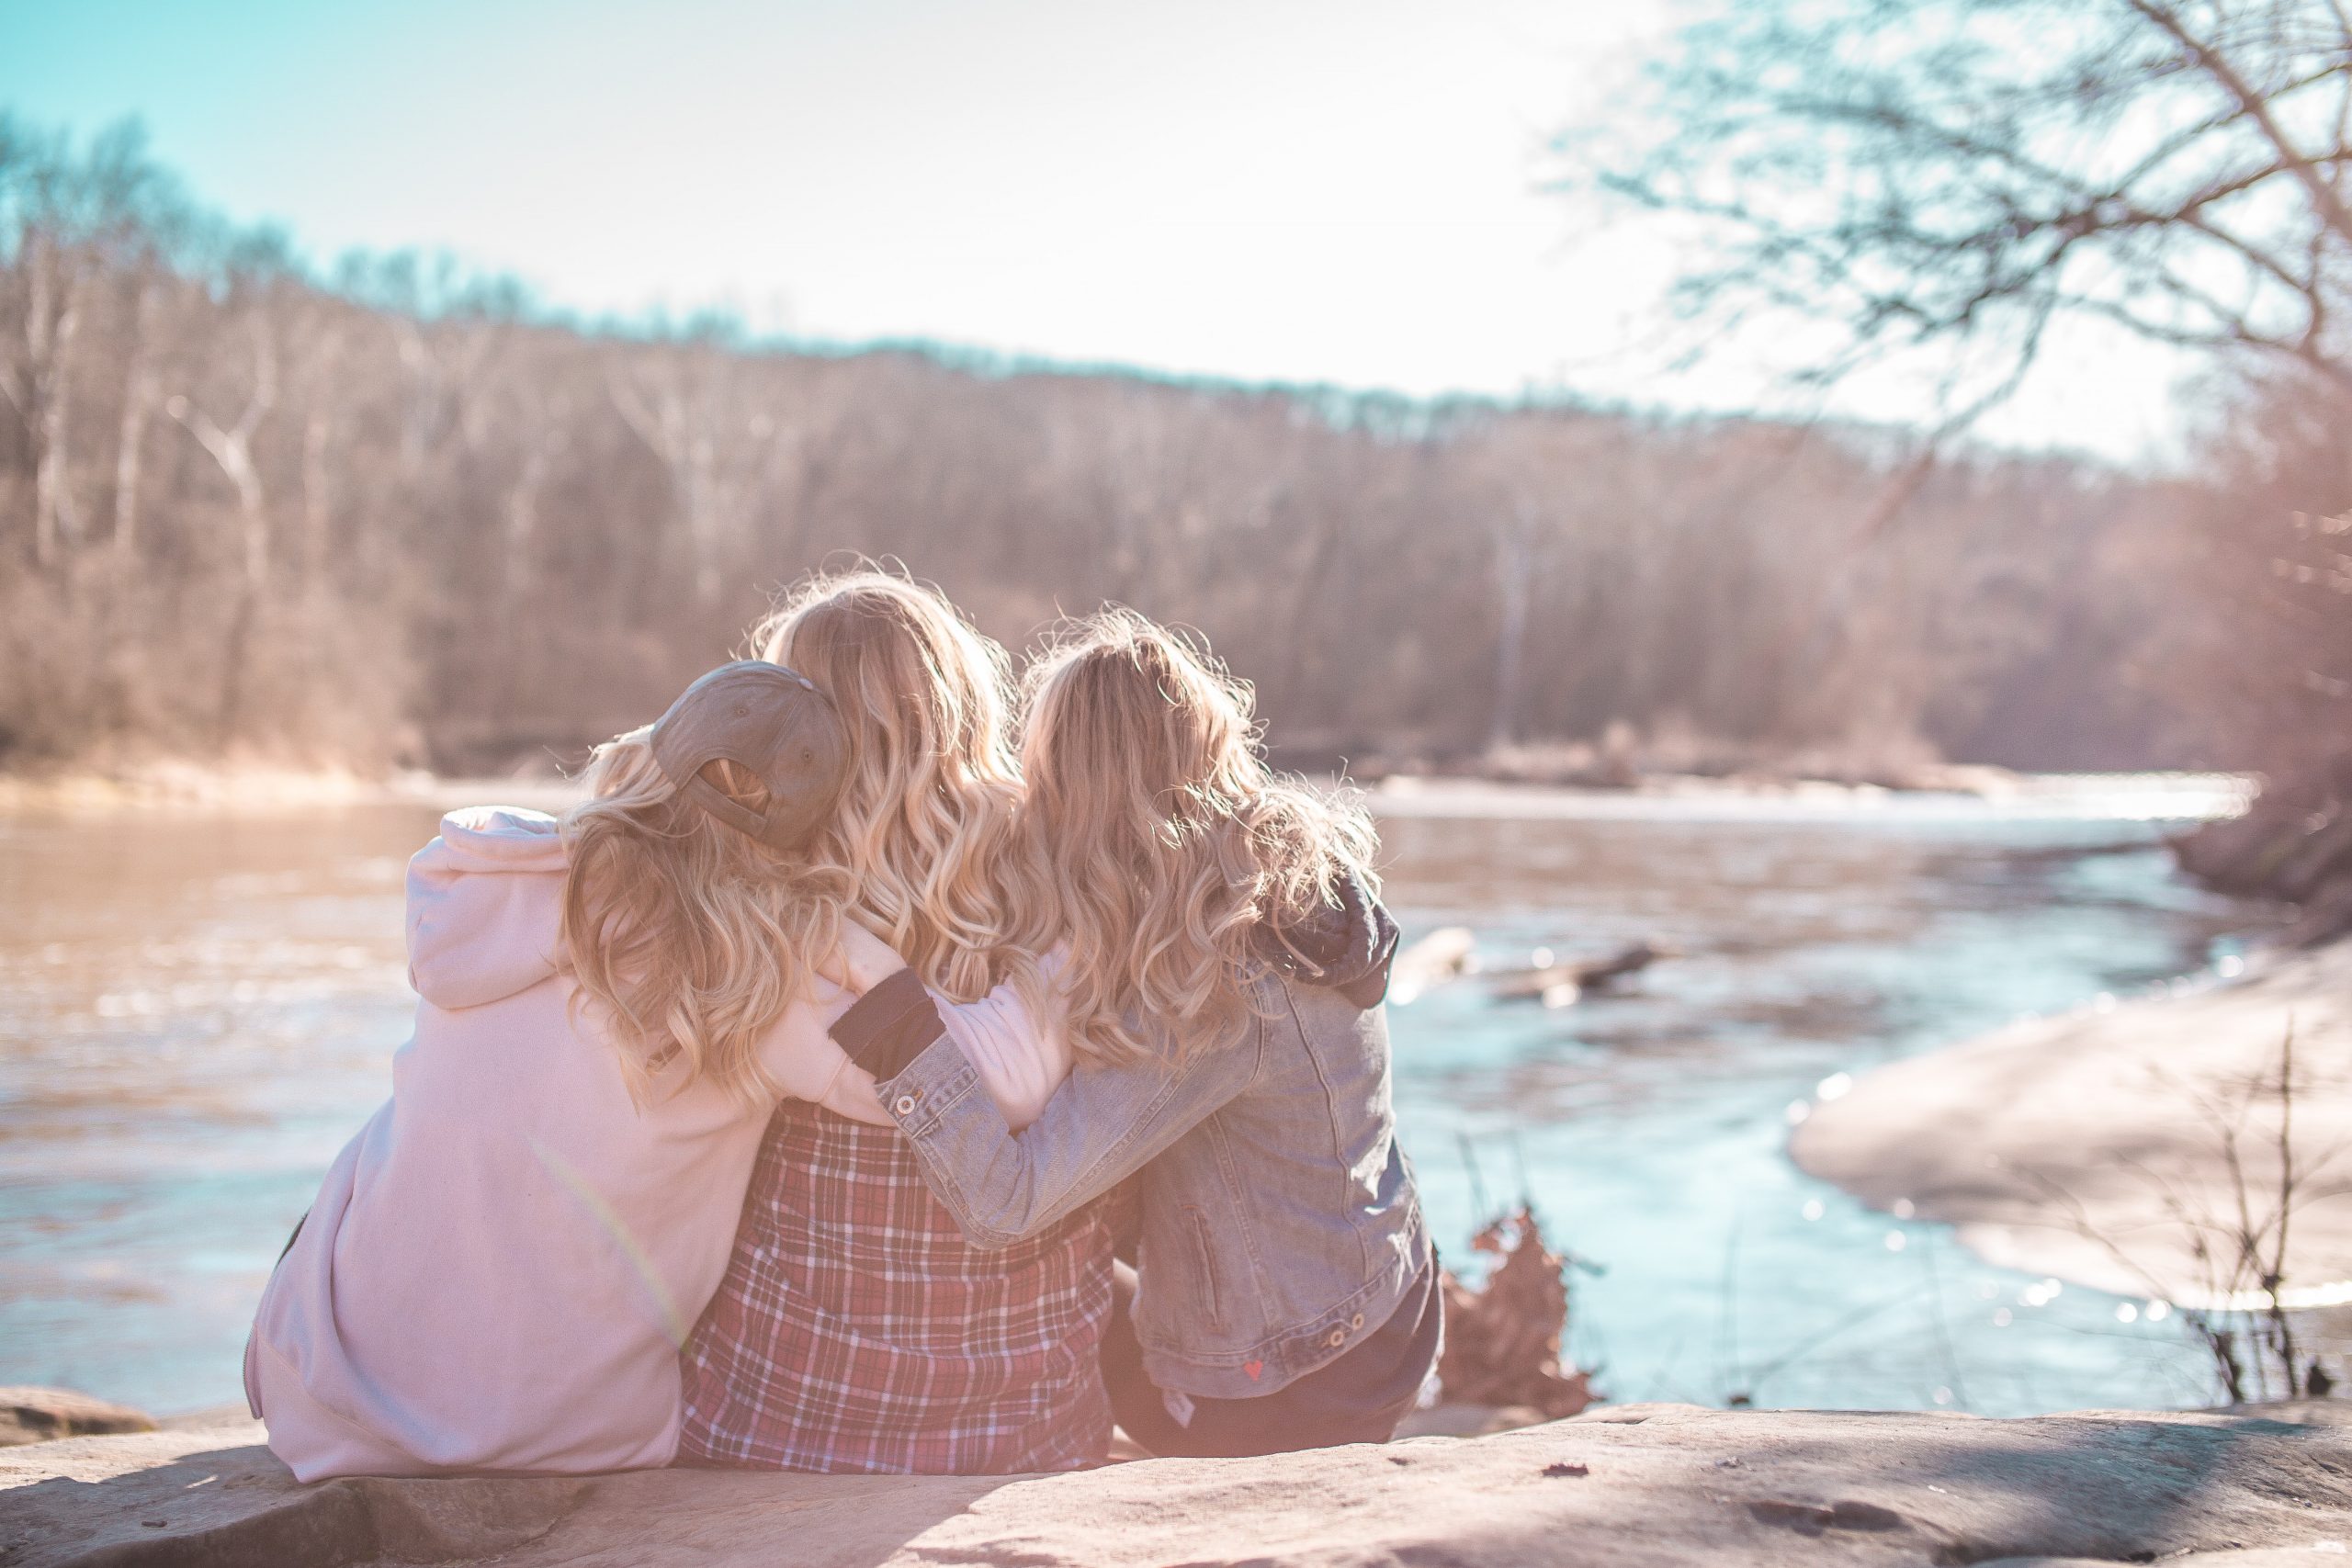 Three women in a supportive embrace looking away.